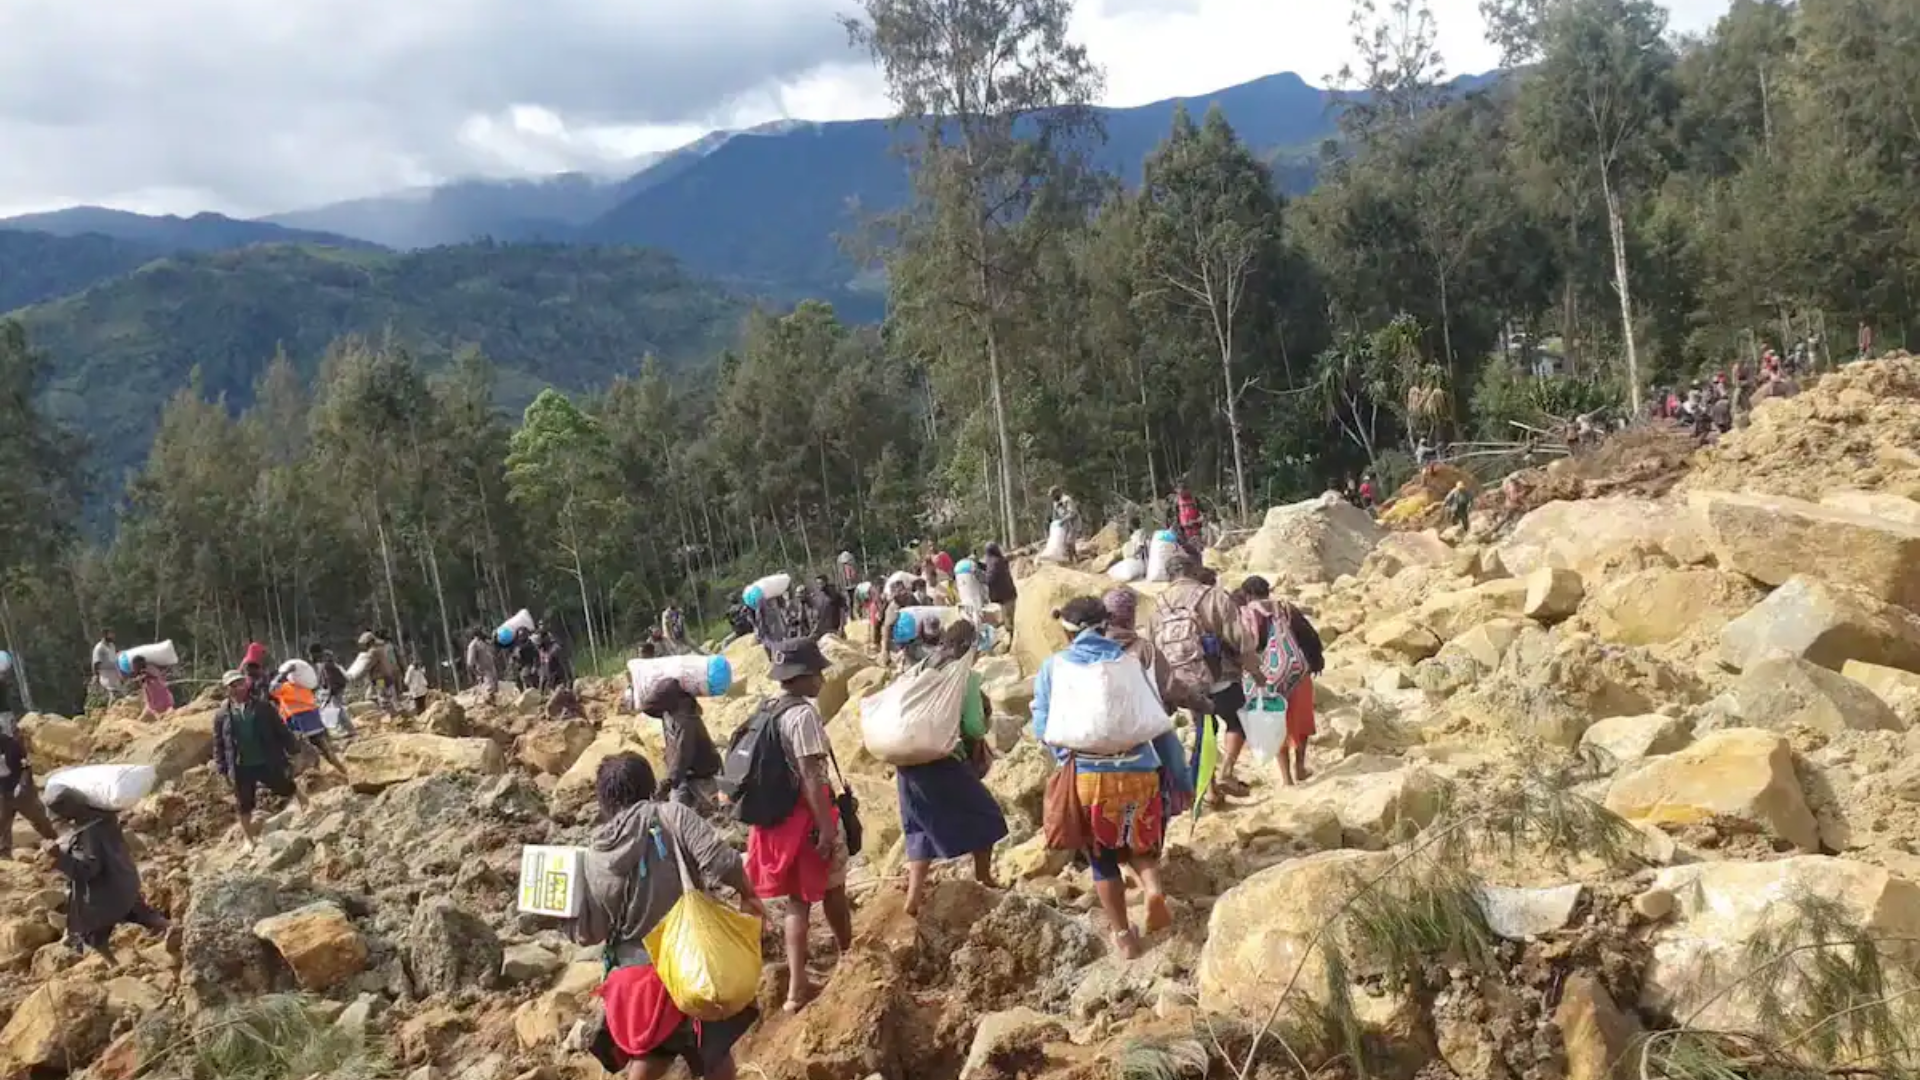 Papua New Guinea: Over 2,000 People Feared Buried In A Landslide